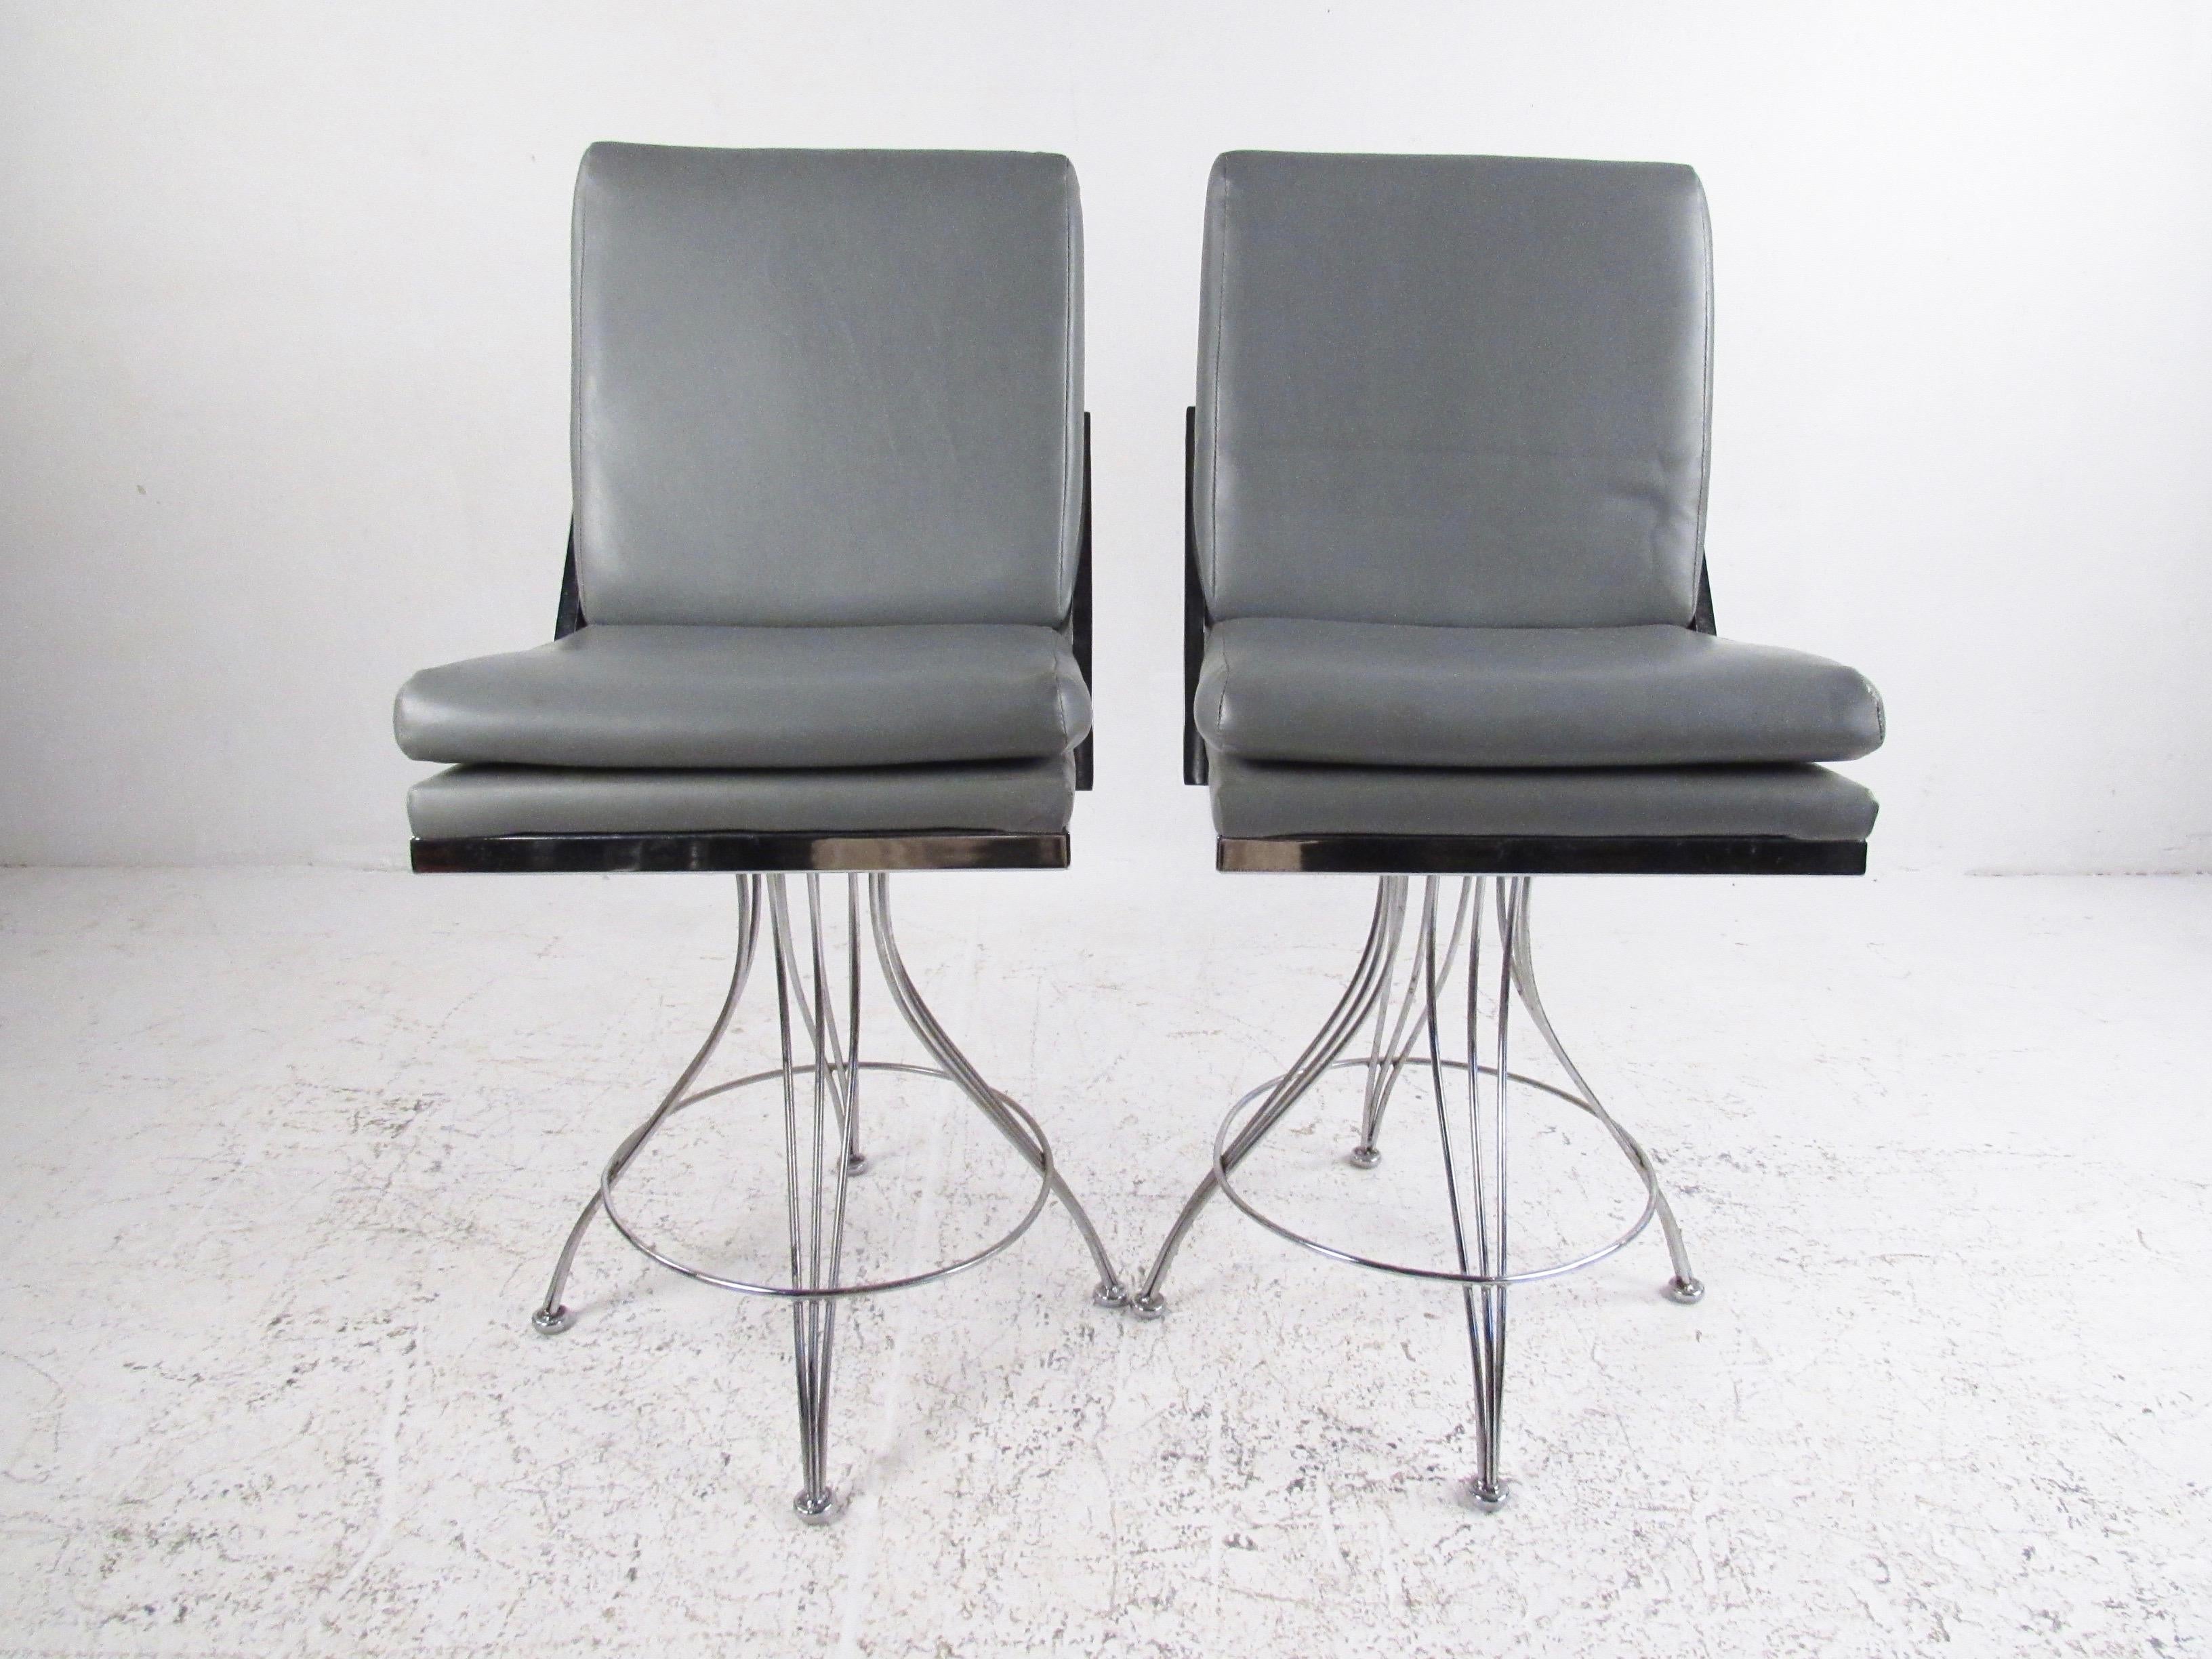 This stylish pair of contemporary modern stools features chrome finish swivel bases with comfortable upholstered seats. The sleek modern design of the matching pair makes a striking addition to home or business counter seating. Measures: 28 inch